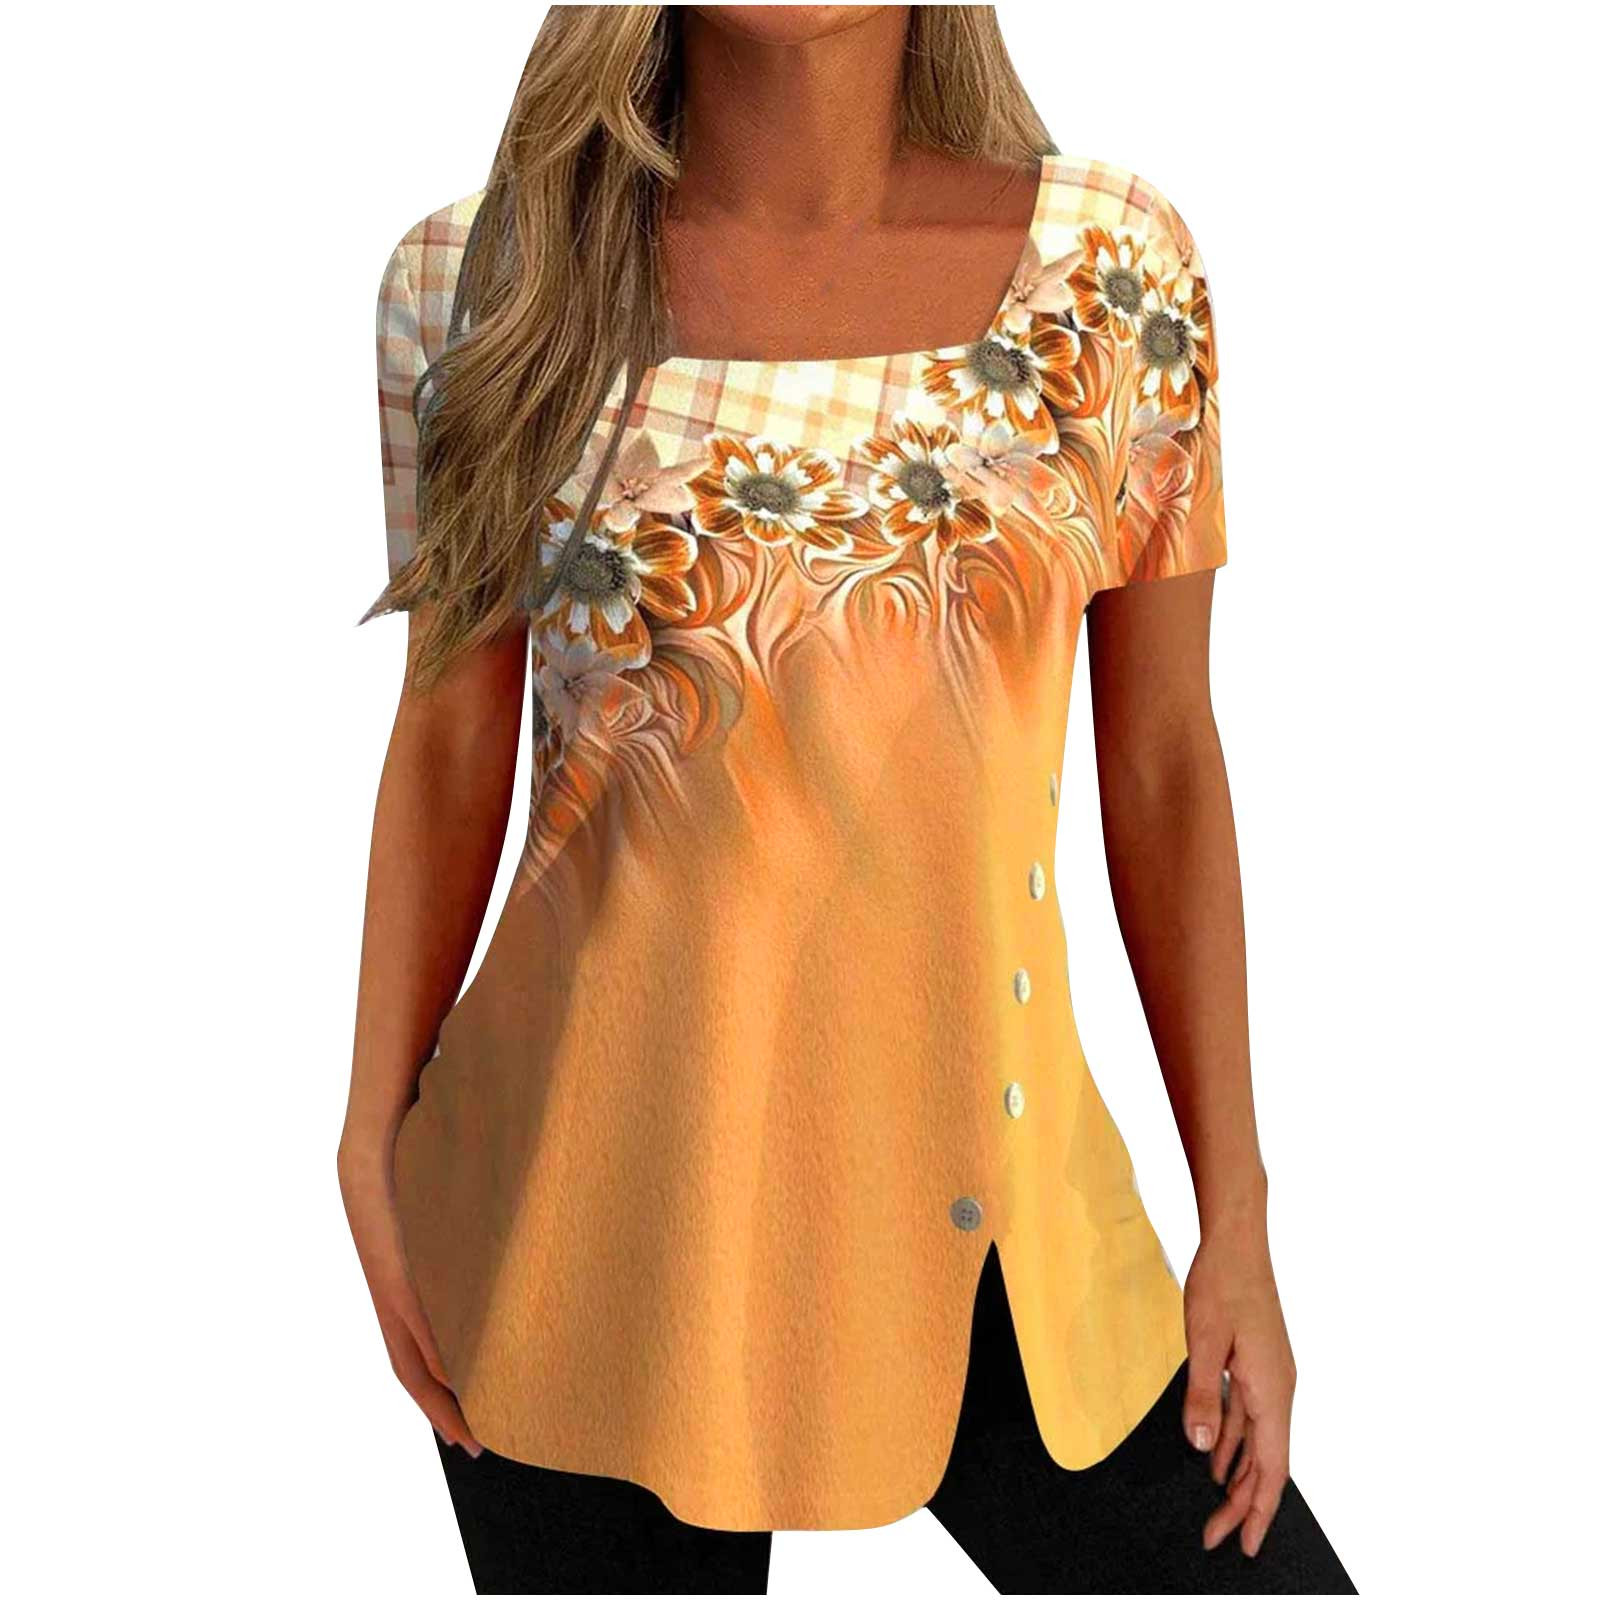 Blouses For Women Short Sleeve Floral Print T Shirt For Ladies Square ...